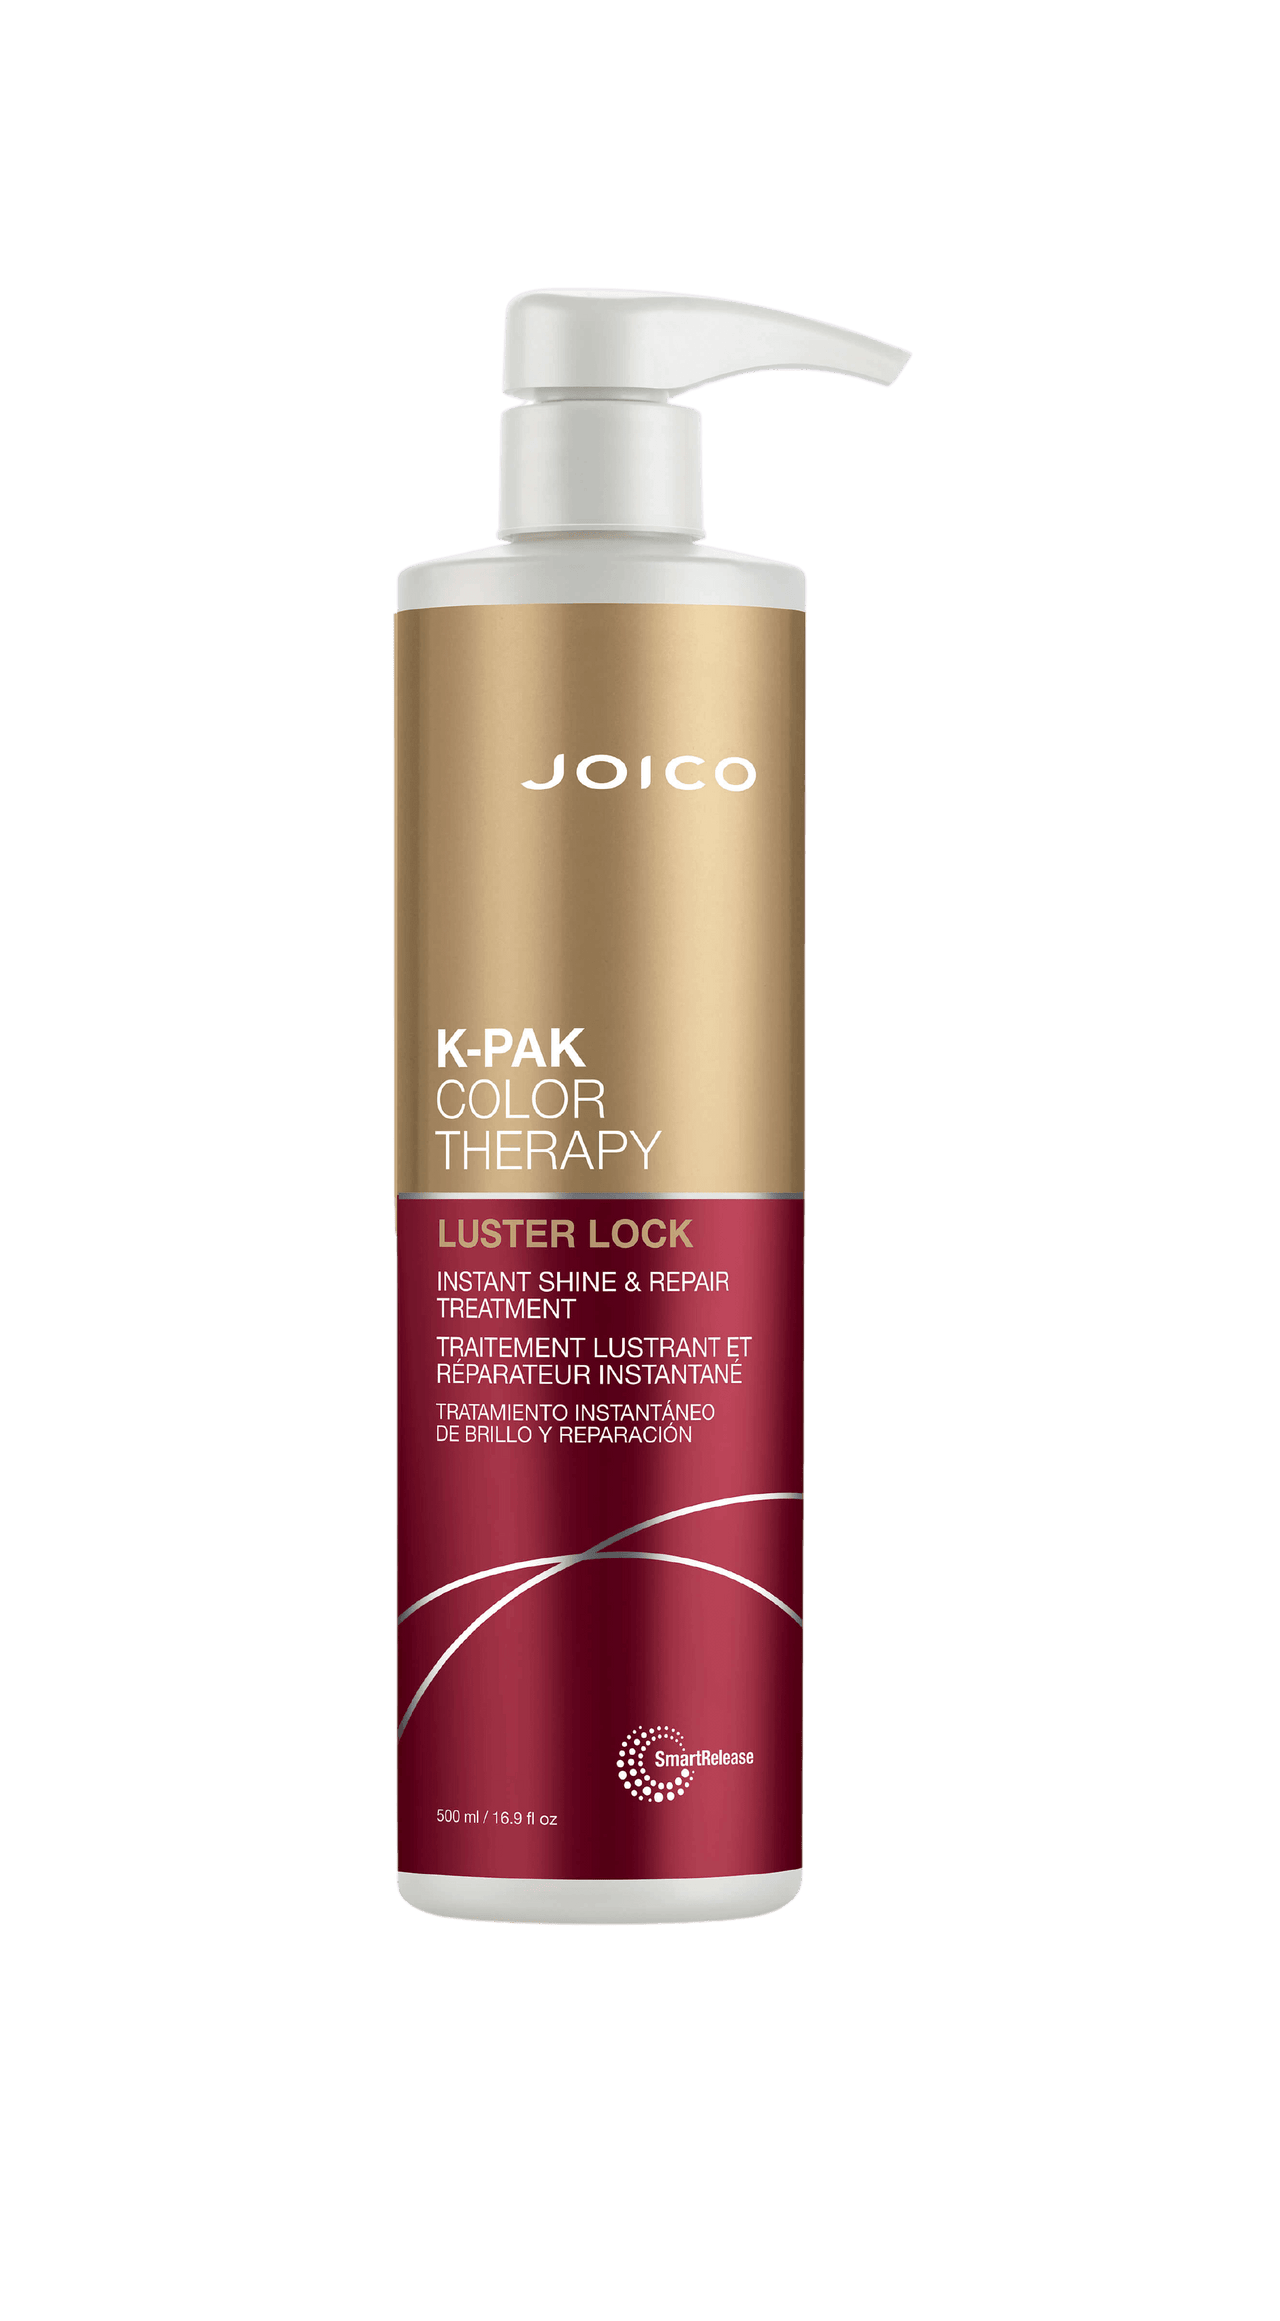 Joico  K-Pak Color Therapy Luster Lock Treatment 500mL Pump Bottle